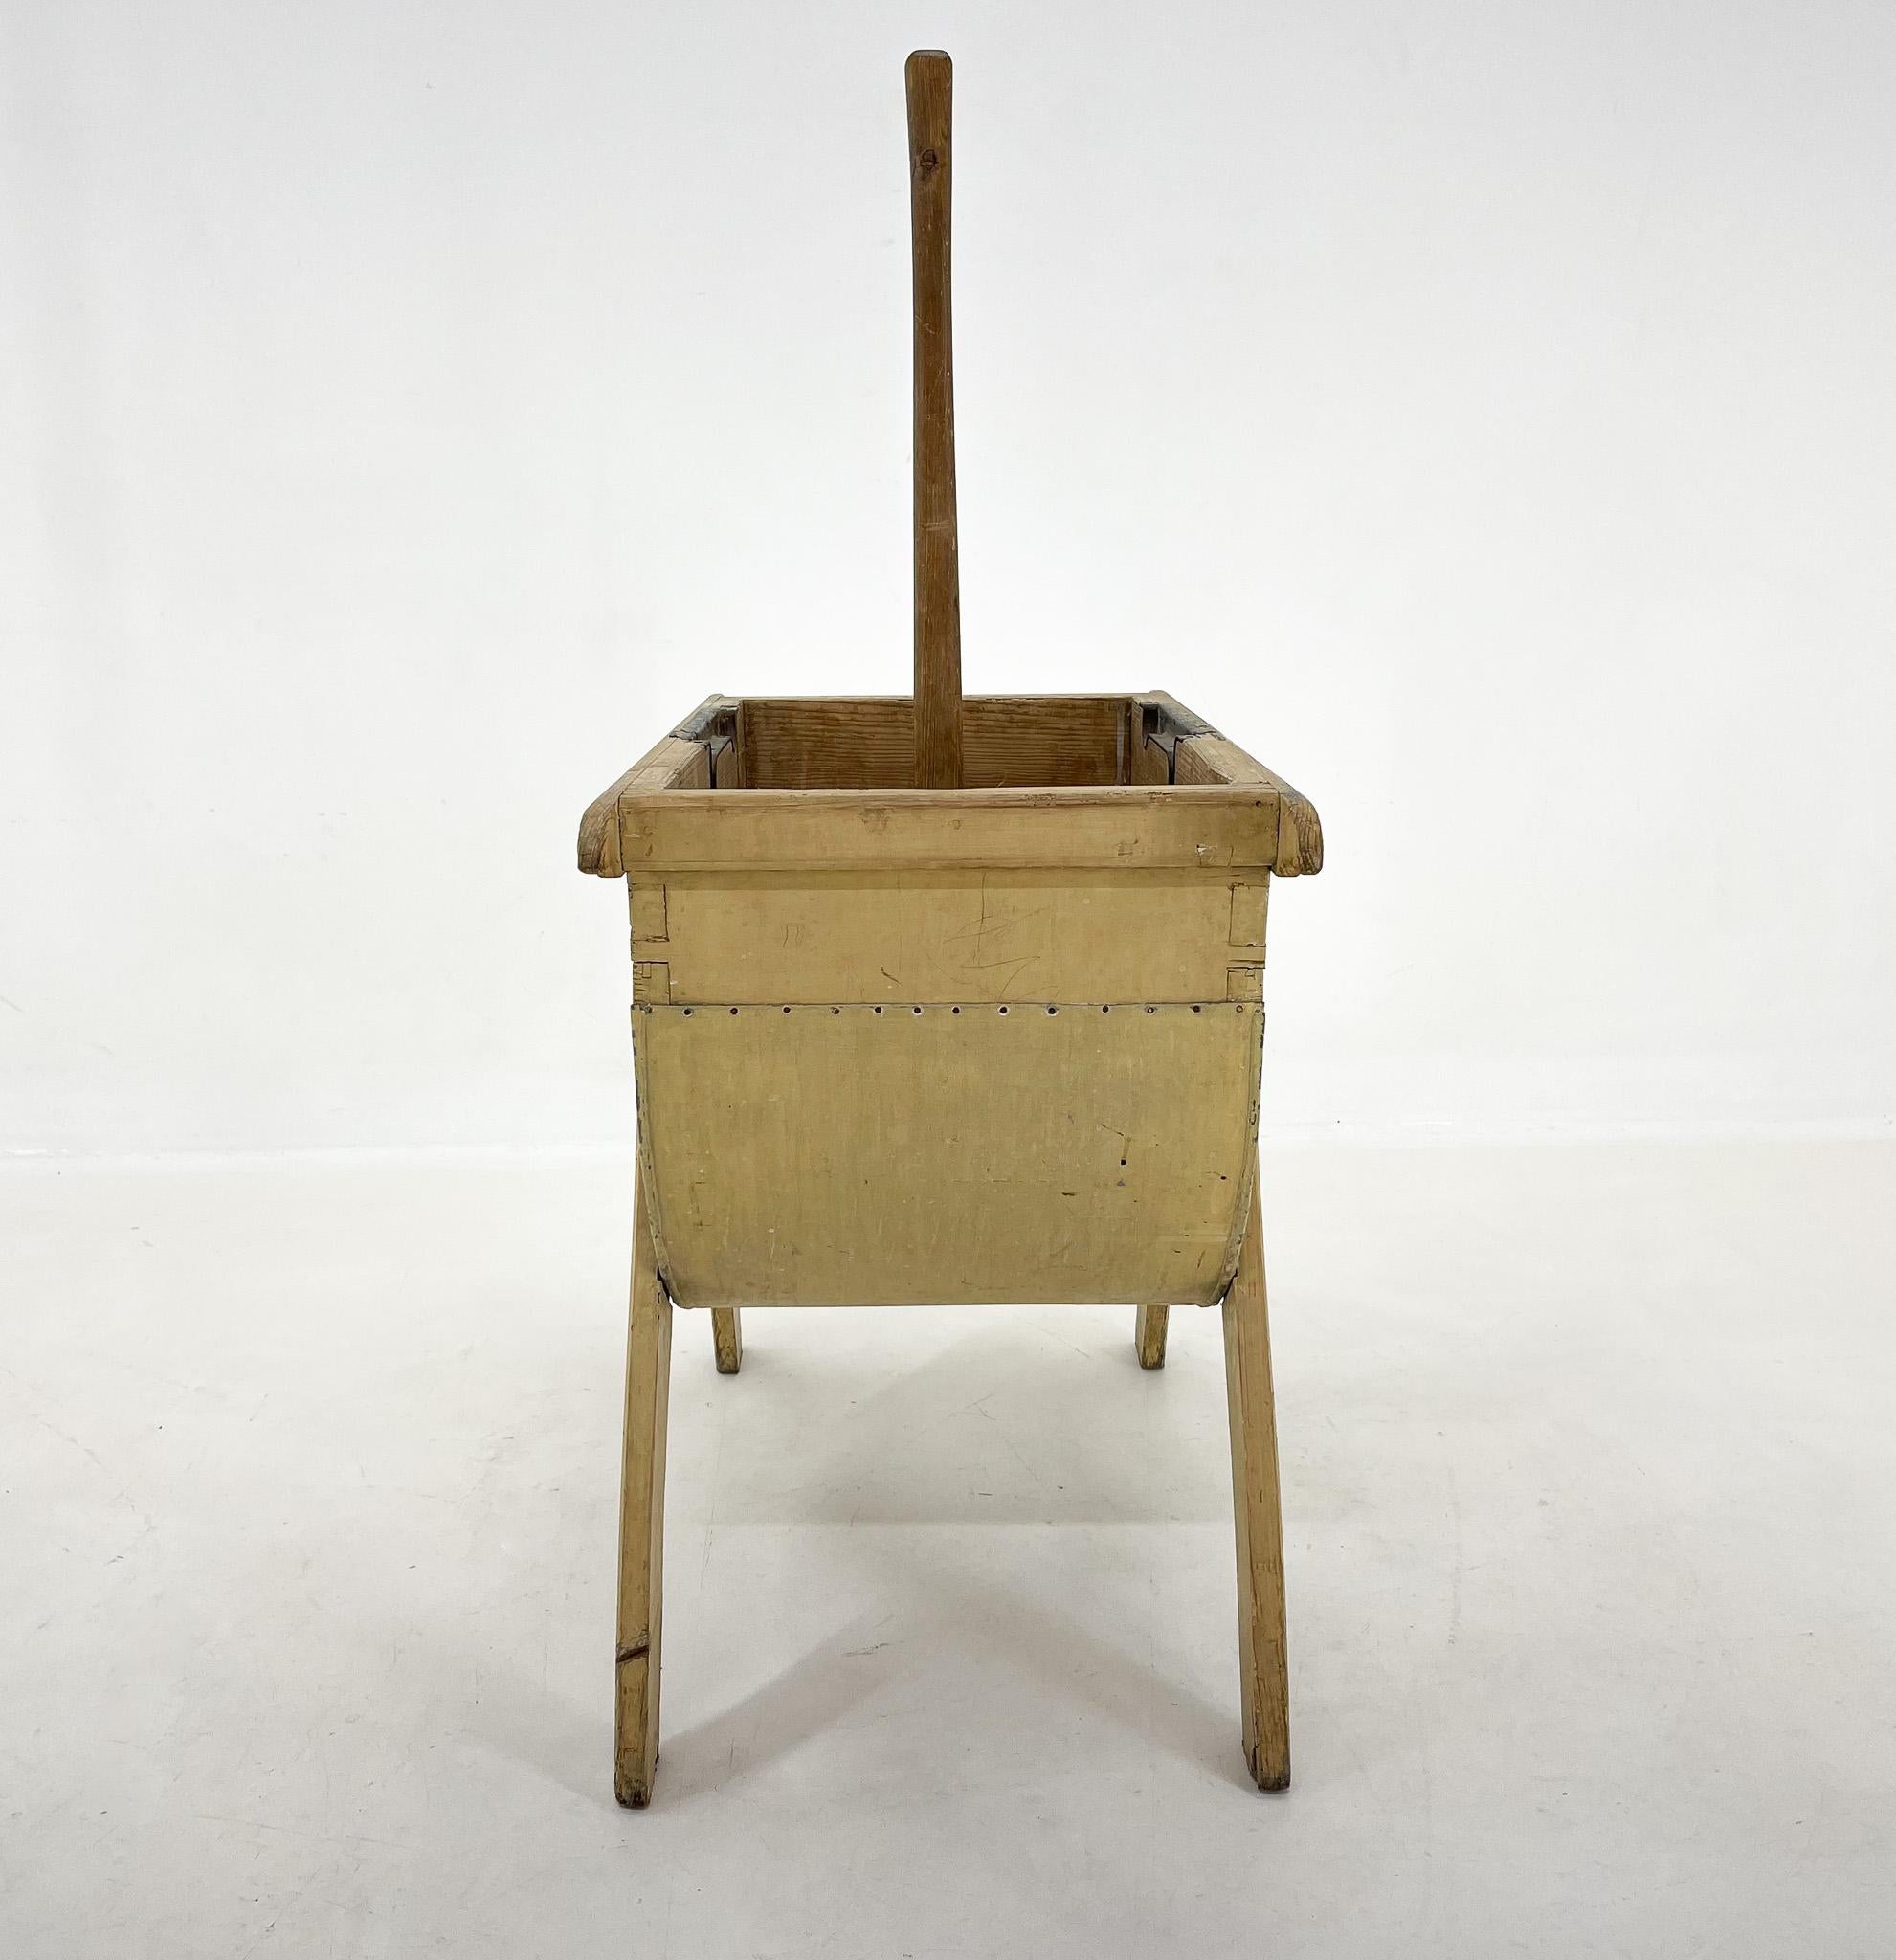 Czech 1900's Wooden Washing Machine For Sale